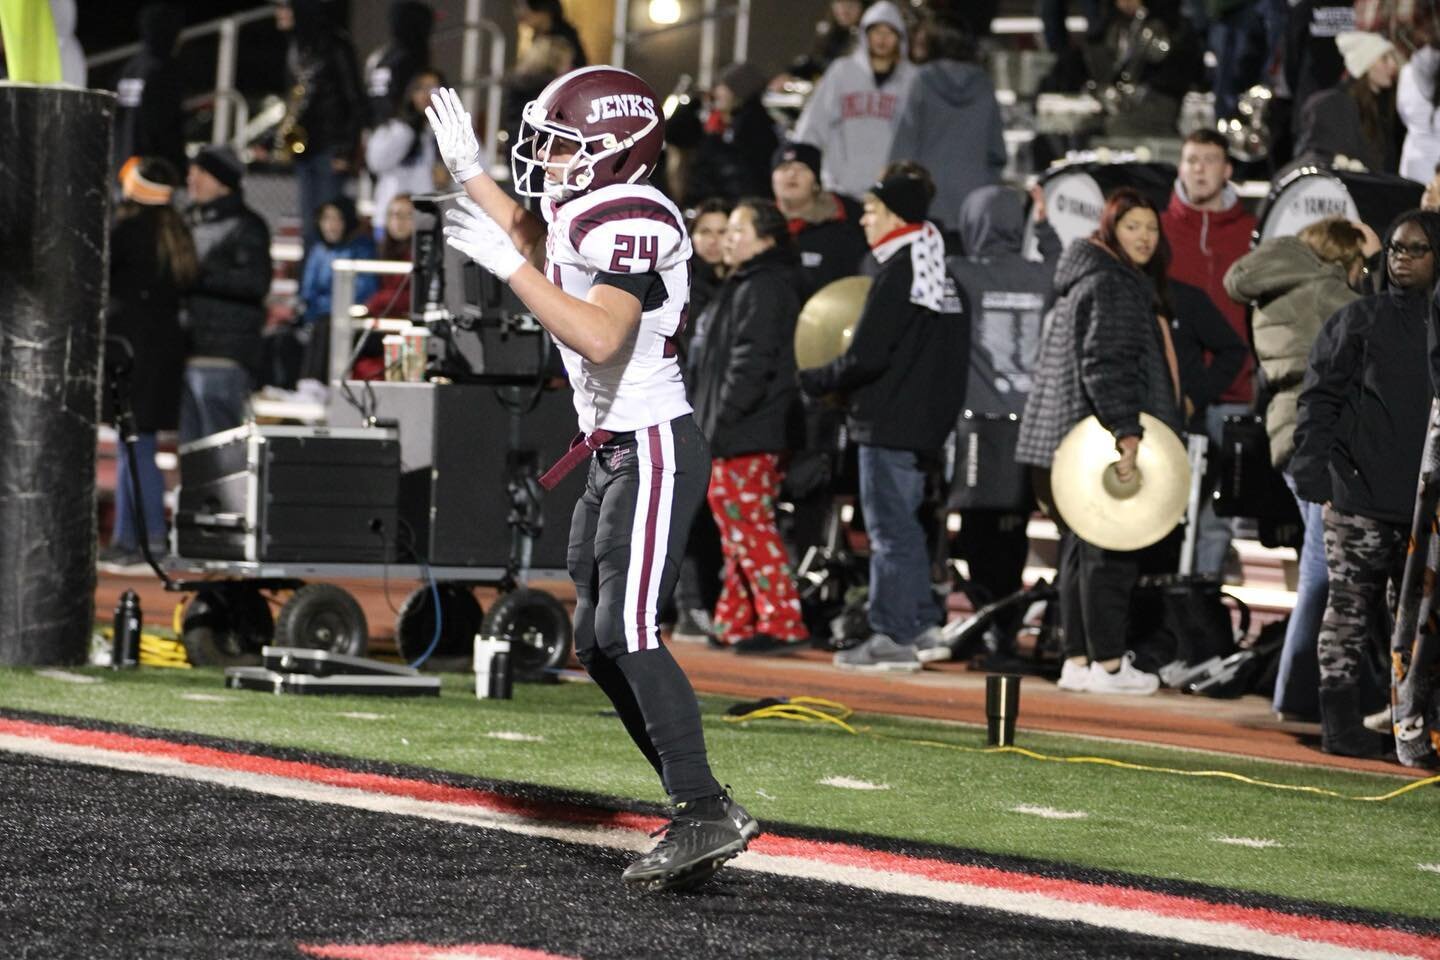 A big congrats to the Jenks football team after their crushing score against Mustang, final score 31-34! Our Trojans are advancing to the third round of playoffs!! 🏆 Go Trojans! 
📸: @sador_dagim 
#jenkstrojantorch